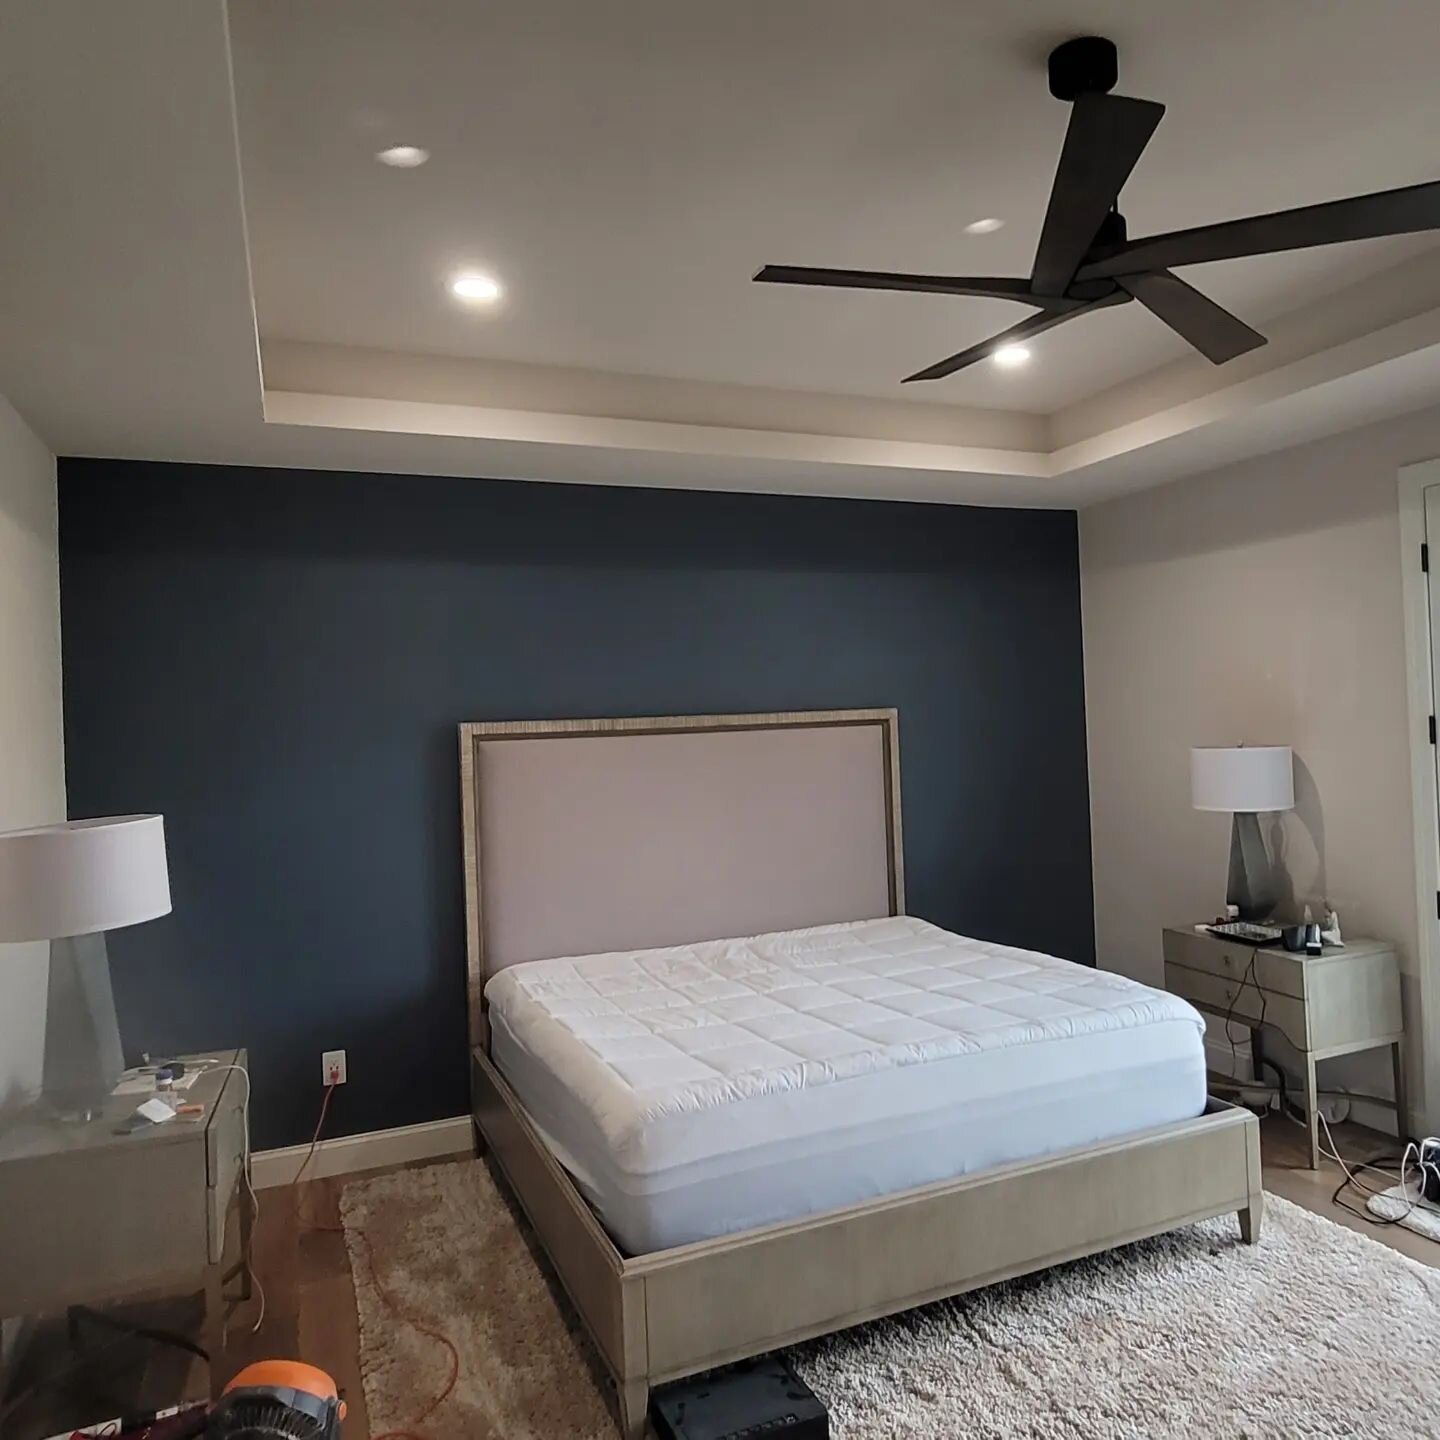 After and before of one of this week's projects was a simple accent wall in a master bedroom. The color is now &quot;Granite Peak&quot; done in satin sheen. The rest of the walls and ceiling are Shoji White flat sheen.

Thanks for checking these out.